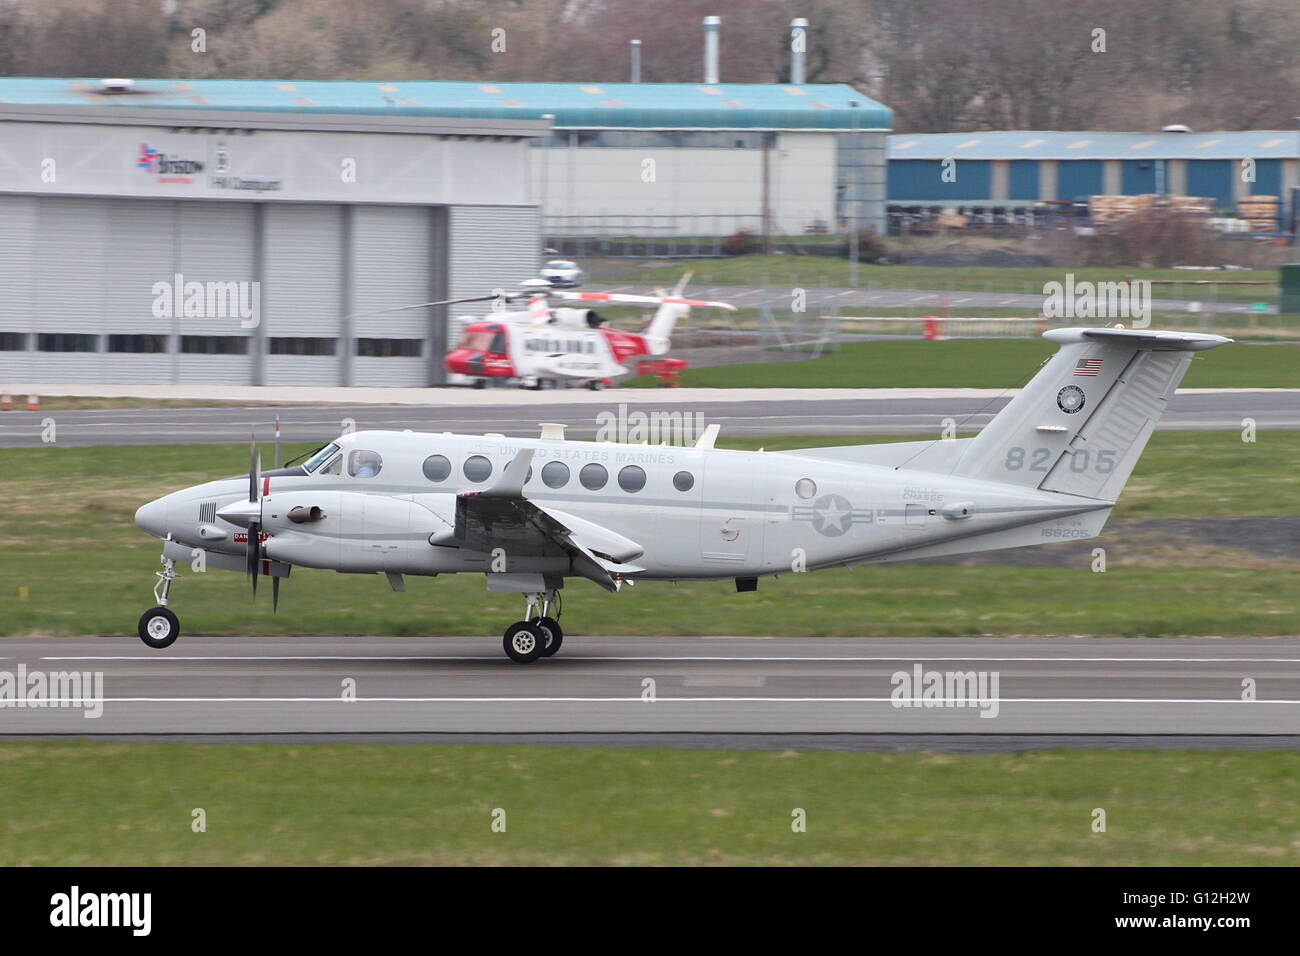 168205, a Beech UC-12W Huron of the 4th MAW, United States Marine Corps, lands at Prestwick International Airport Stock Photo